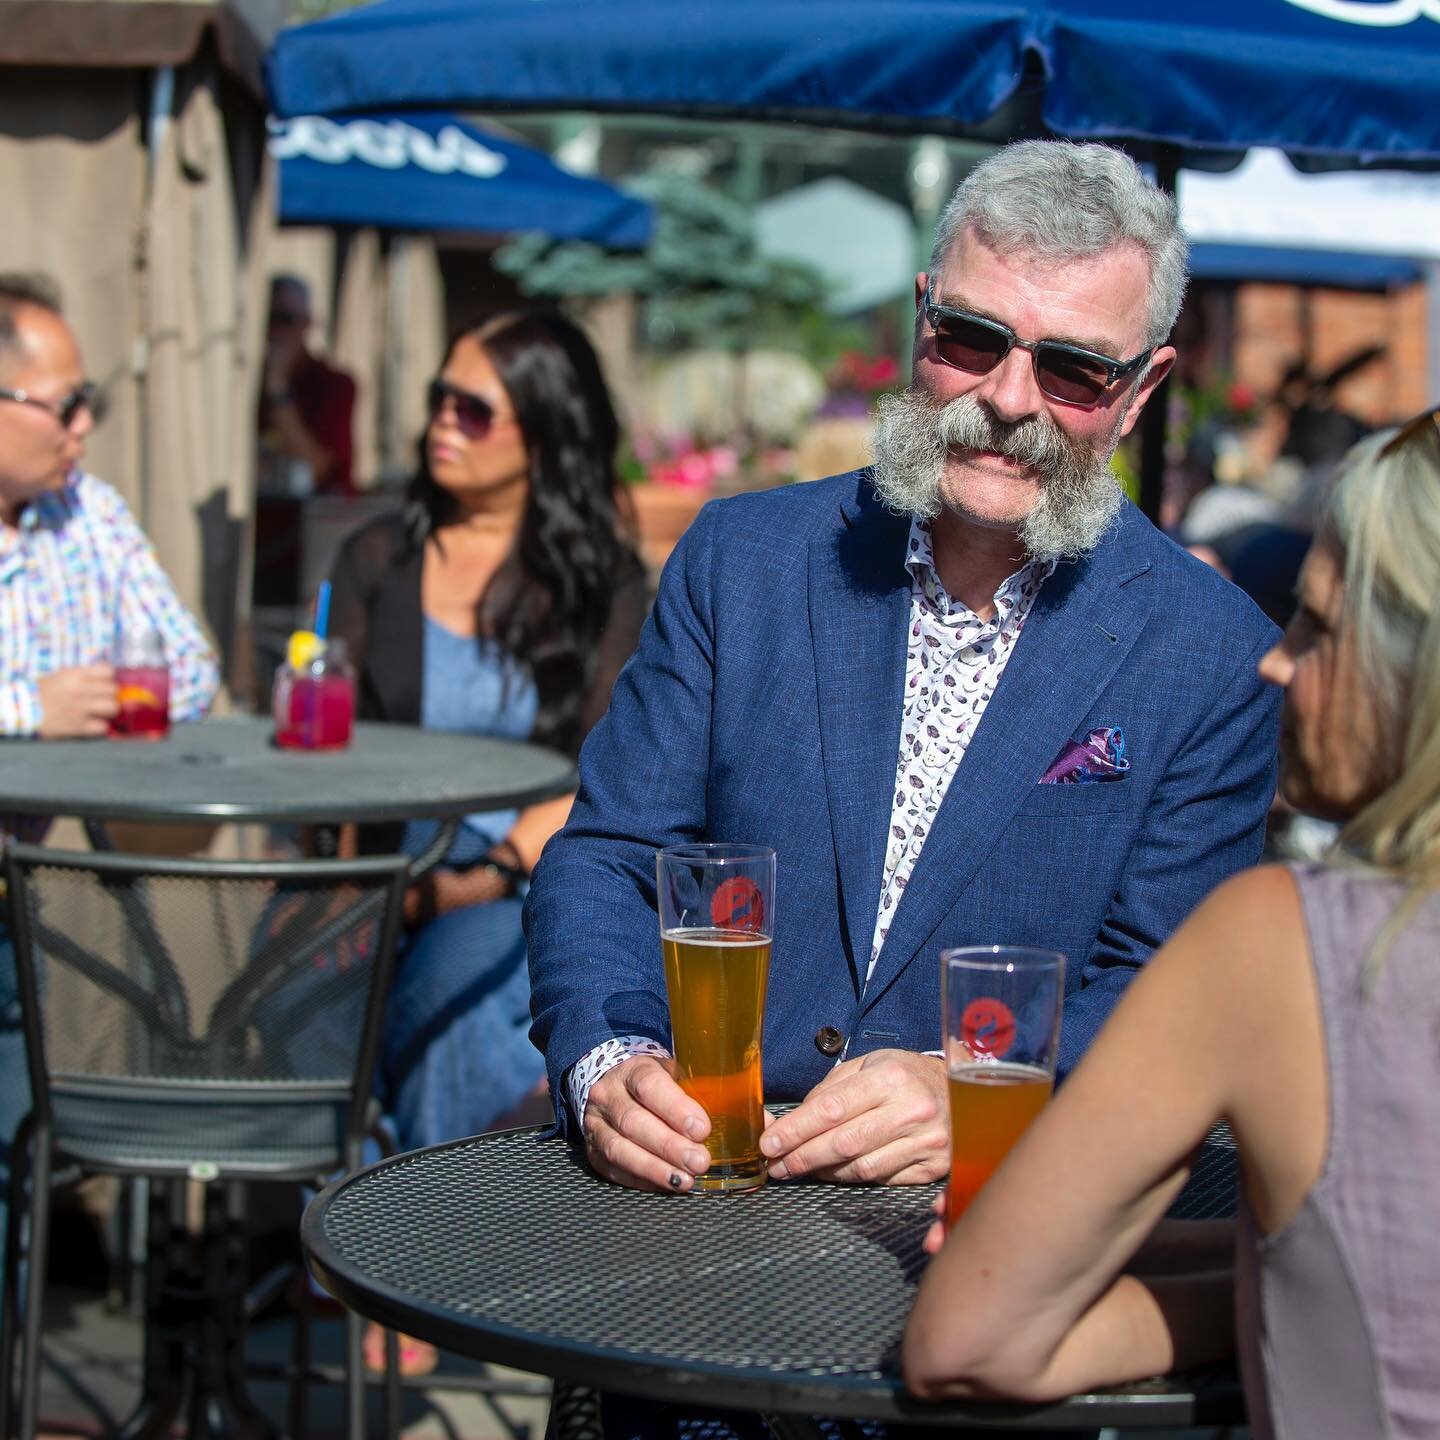 Perfection is this brilliant blue linen/silk suit by @jackvictorofficial paired with a linen shirt by @samuelsohn 🇨🇦
Cheers to patio&rsquo;s everywhere!
🍻 ☀️ 😎
#EddiesMensWear
#JustSouthOfNormal
.
.
.
.
#staffphotobomb
#madeincanada
#yeg #edmonto